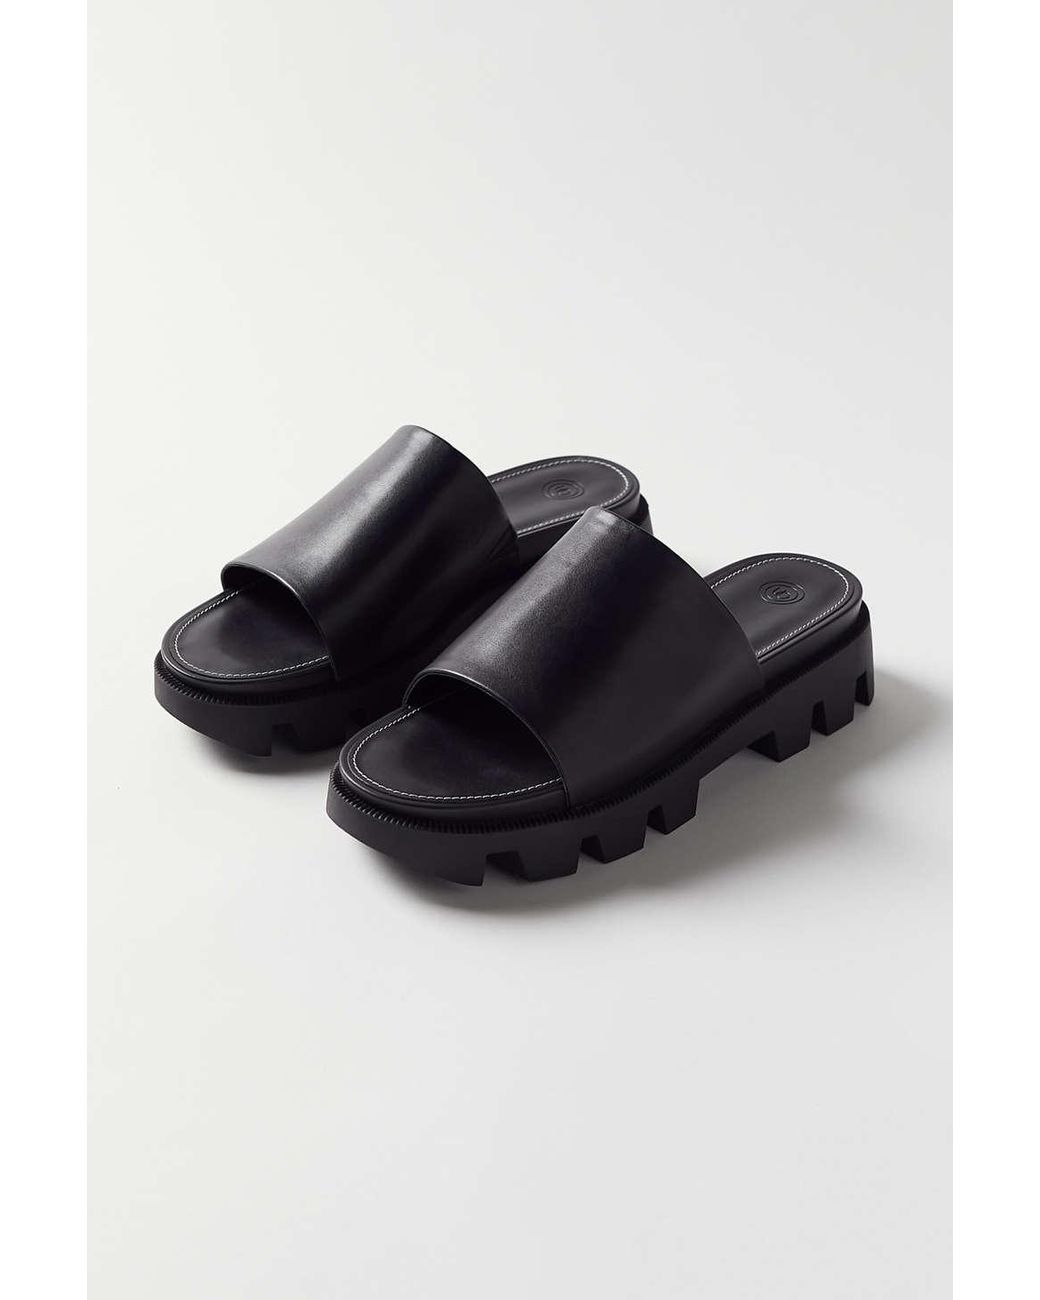 Urban Outfitters Uo Roxy Chunky Slide Sandal in Black | Lyst